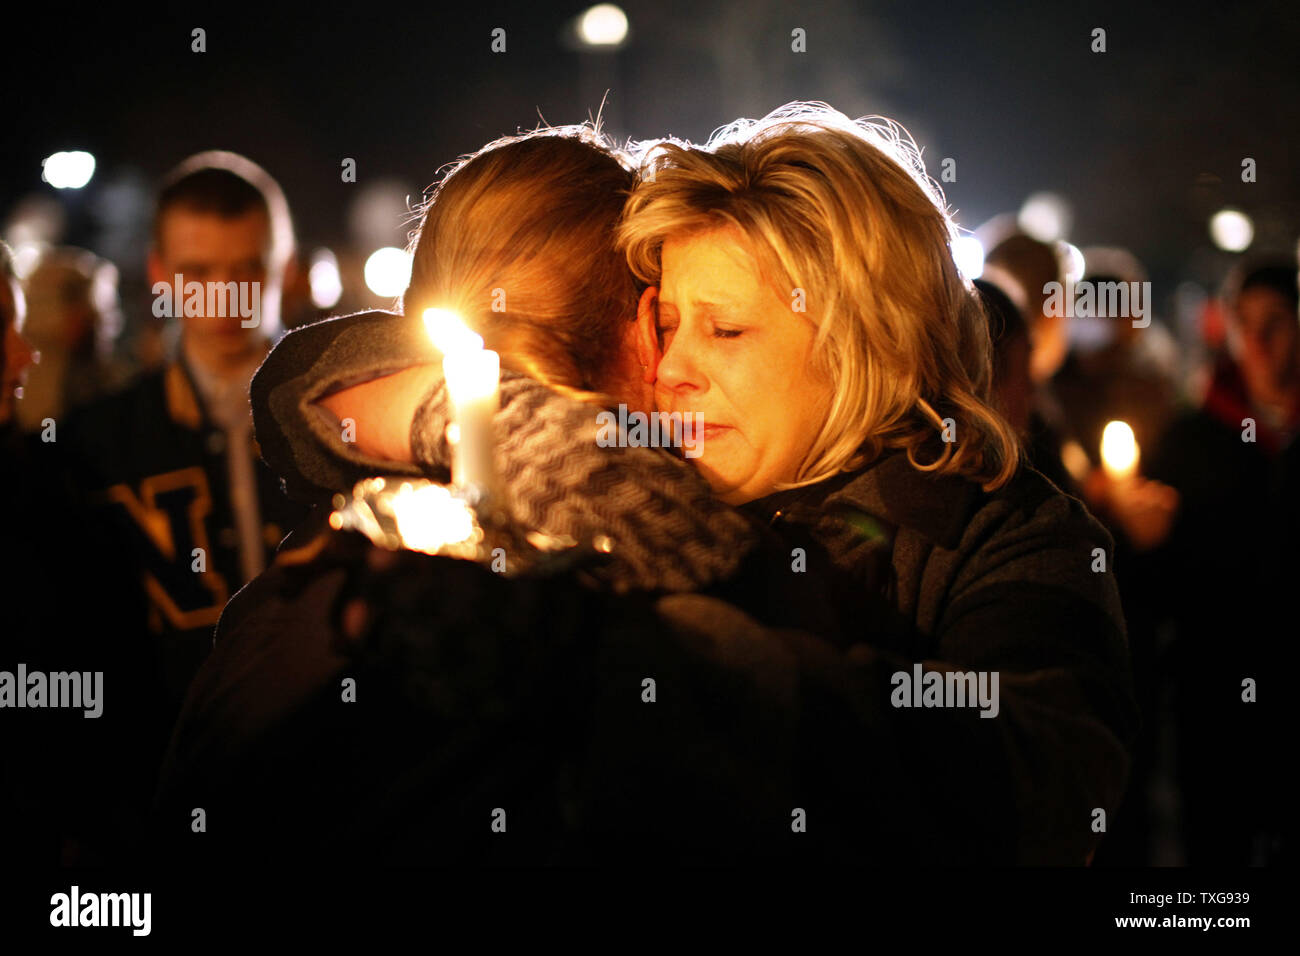 Two women hug outside of Saint Rose of Lima Catholic Church in Newtown, Connecticut during a prayer service and vigil in response to a shooting that left at least 26 people dead including 18 children at the Sandy Hook School earlier in the day on December 14, 2012.  A gunman opened fire inside inside Sandy Hook Elementary School early Friday morning where his mother worked.  The suspect 20-year-old Adam Lanza, reportedly killed himself following the shooting rampage inside the school.  UPI/Matt Healey Stock Photo